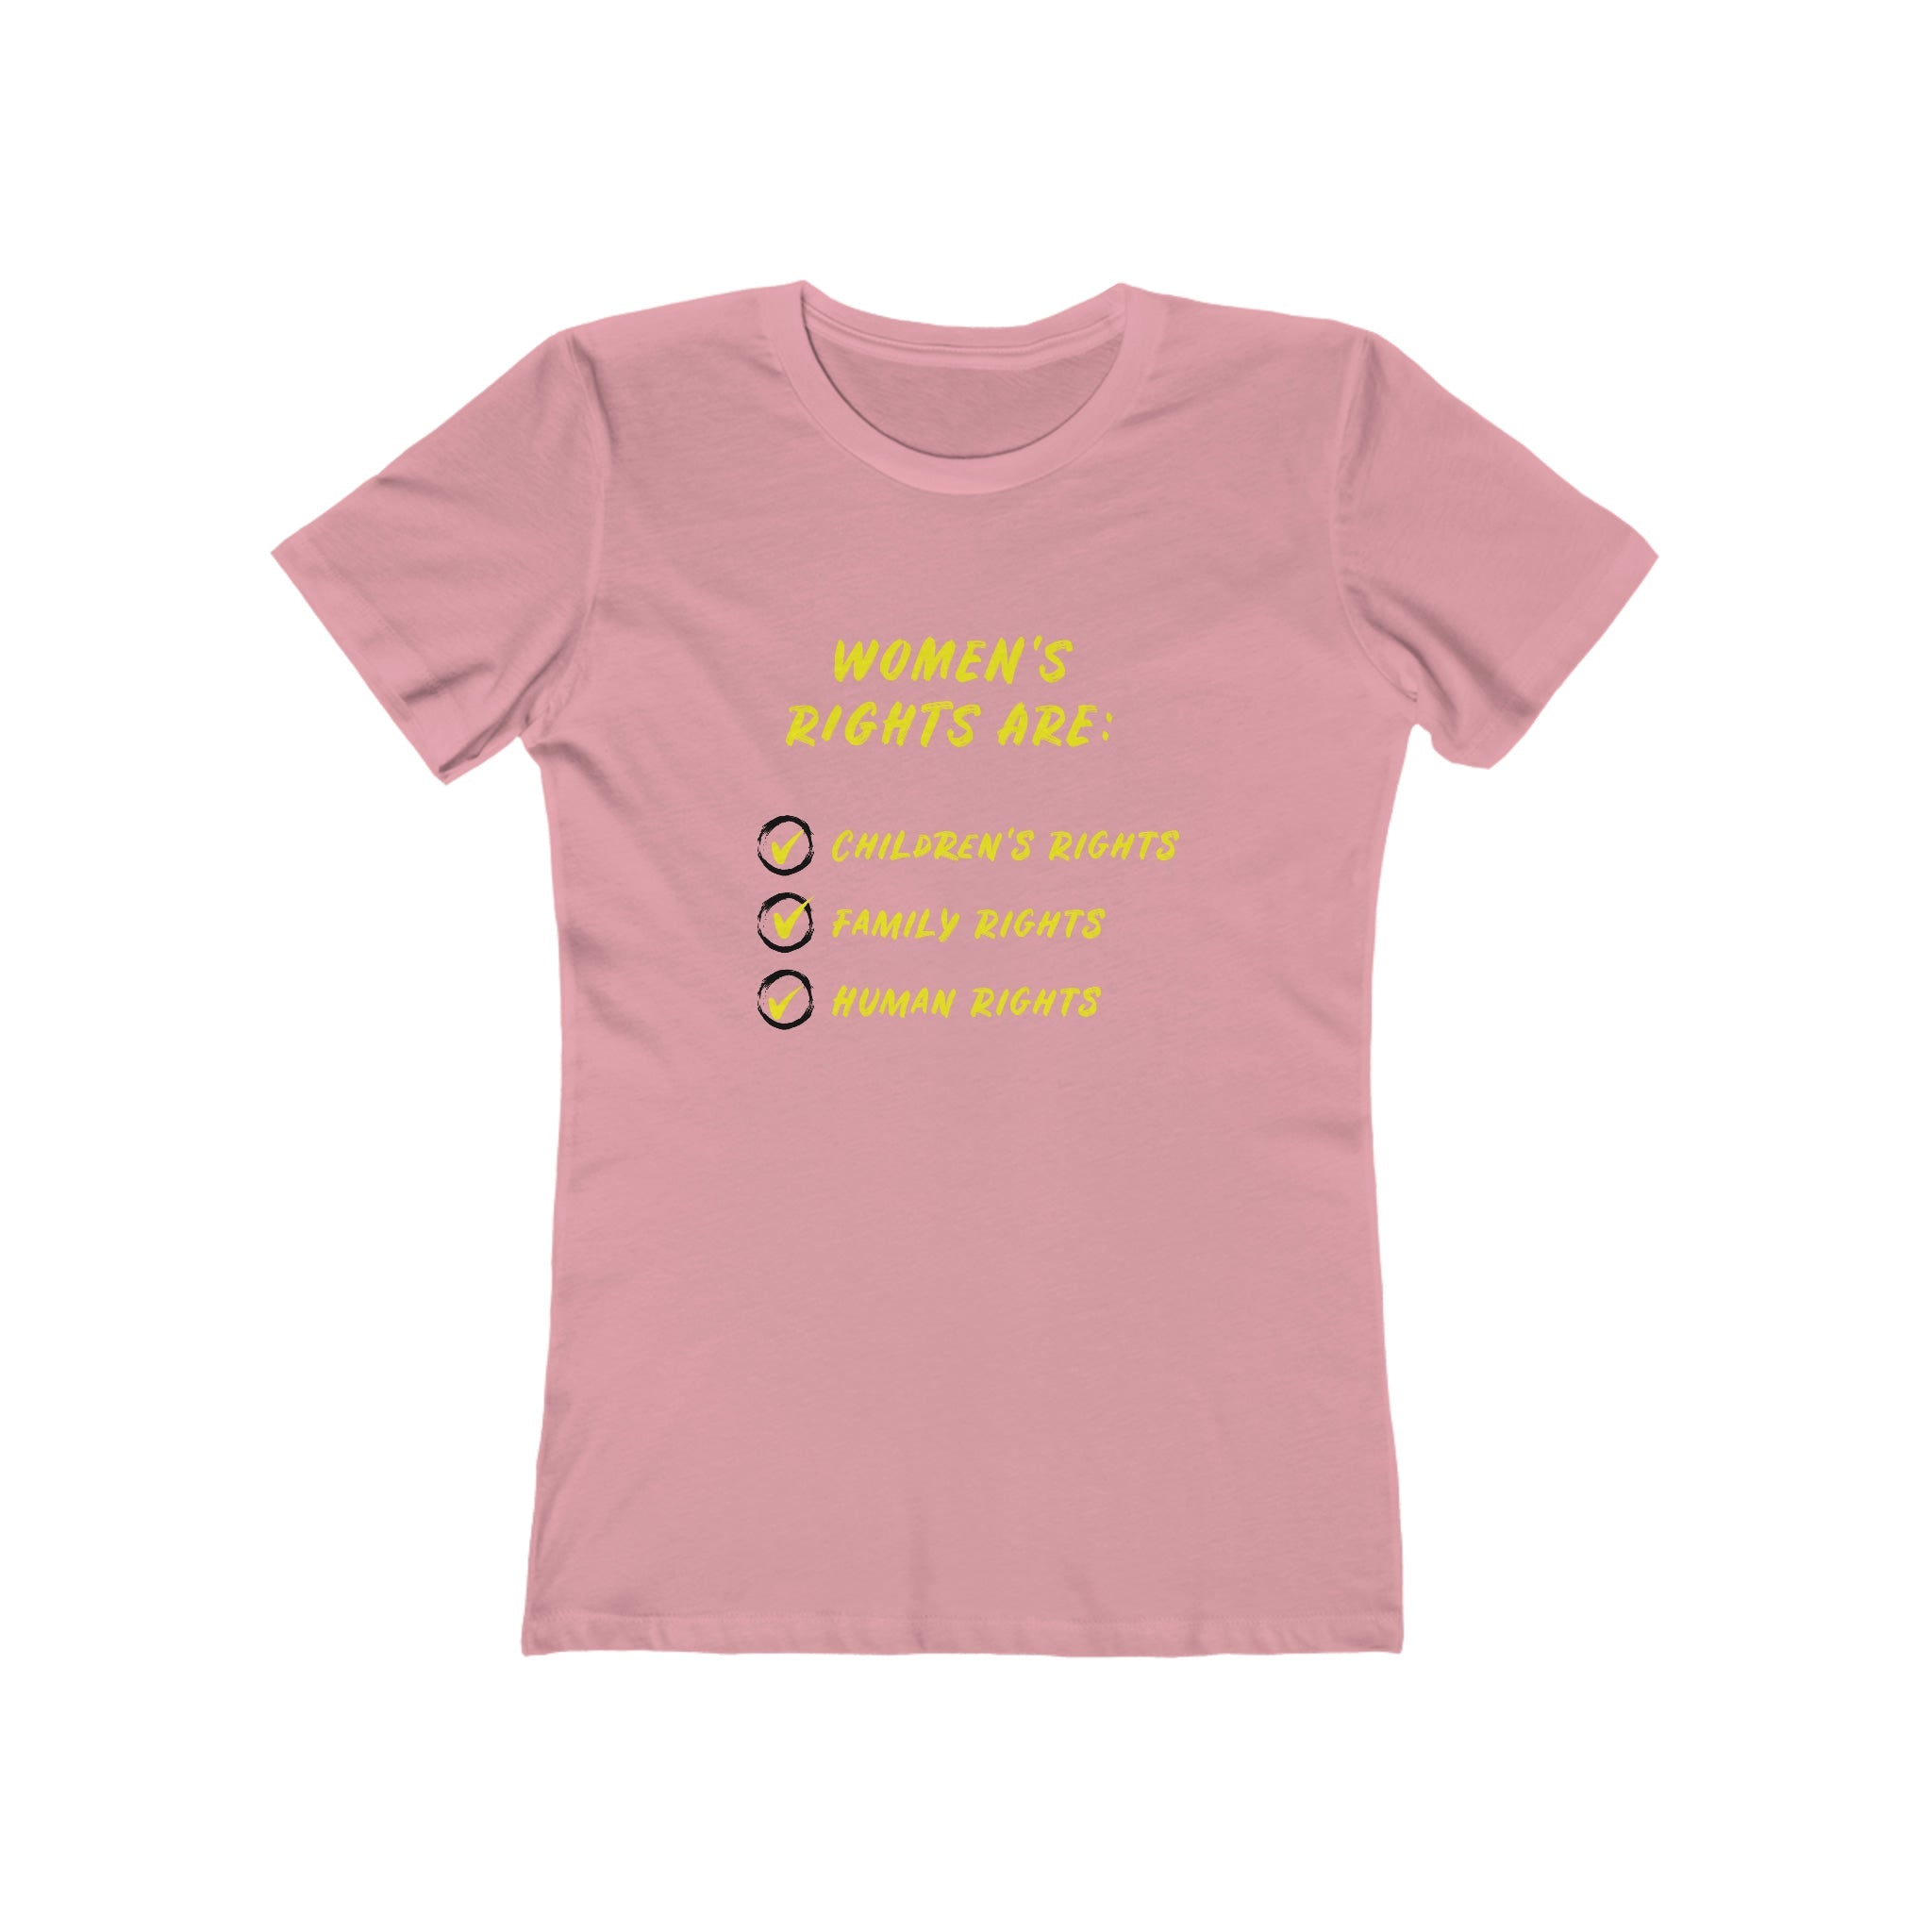 Women's rights are everyone's rights : Women's 100% Cotton T-Shirt